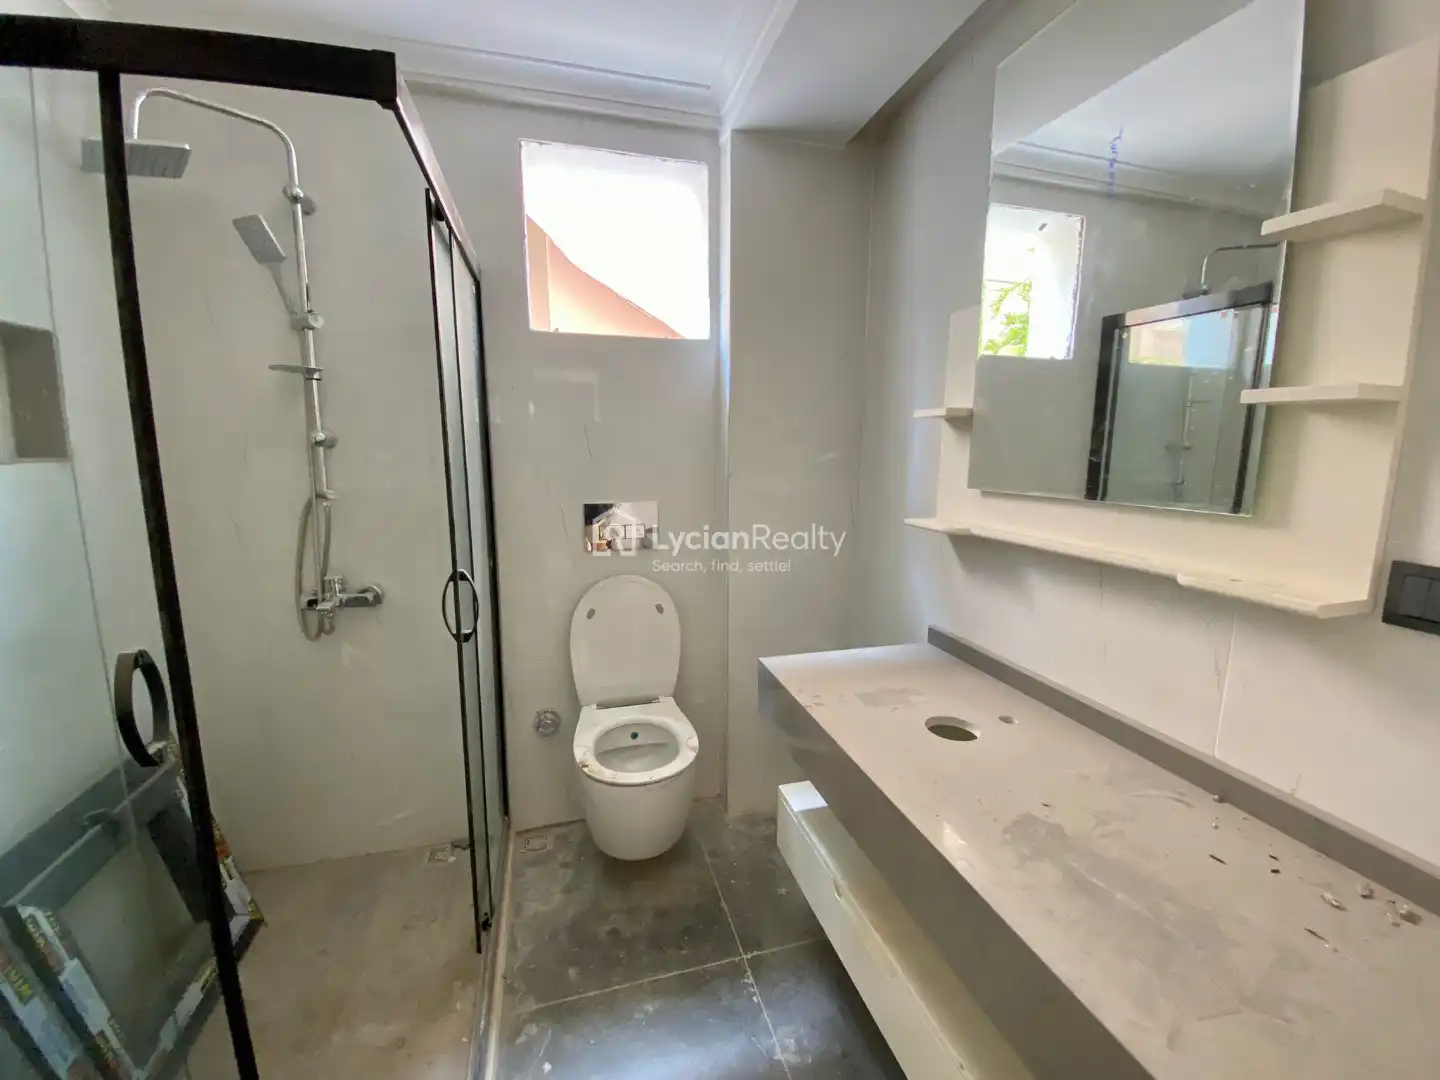 FLAT AMORE Property for Sale in Turkey